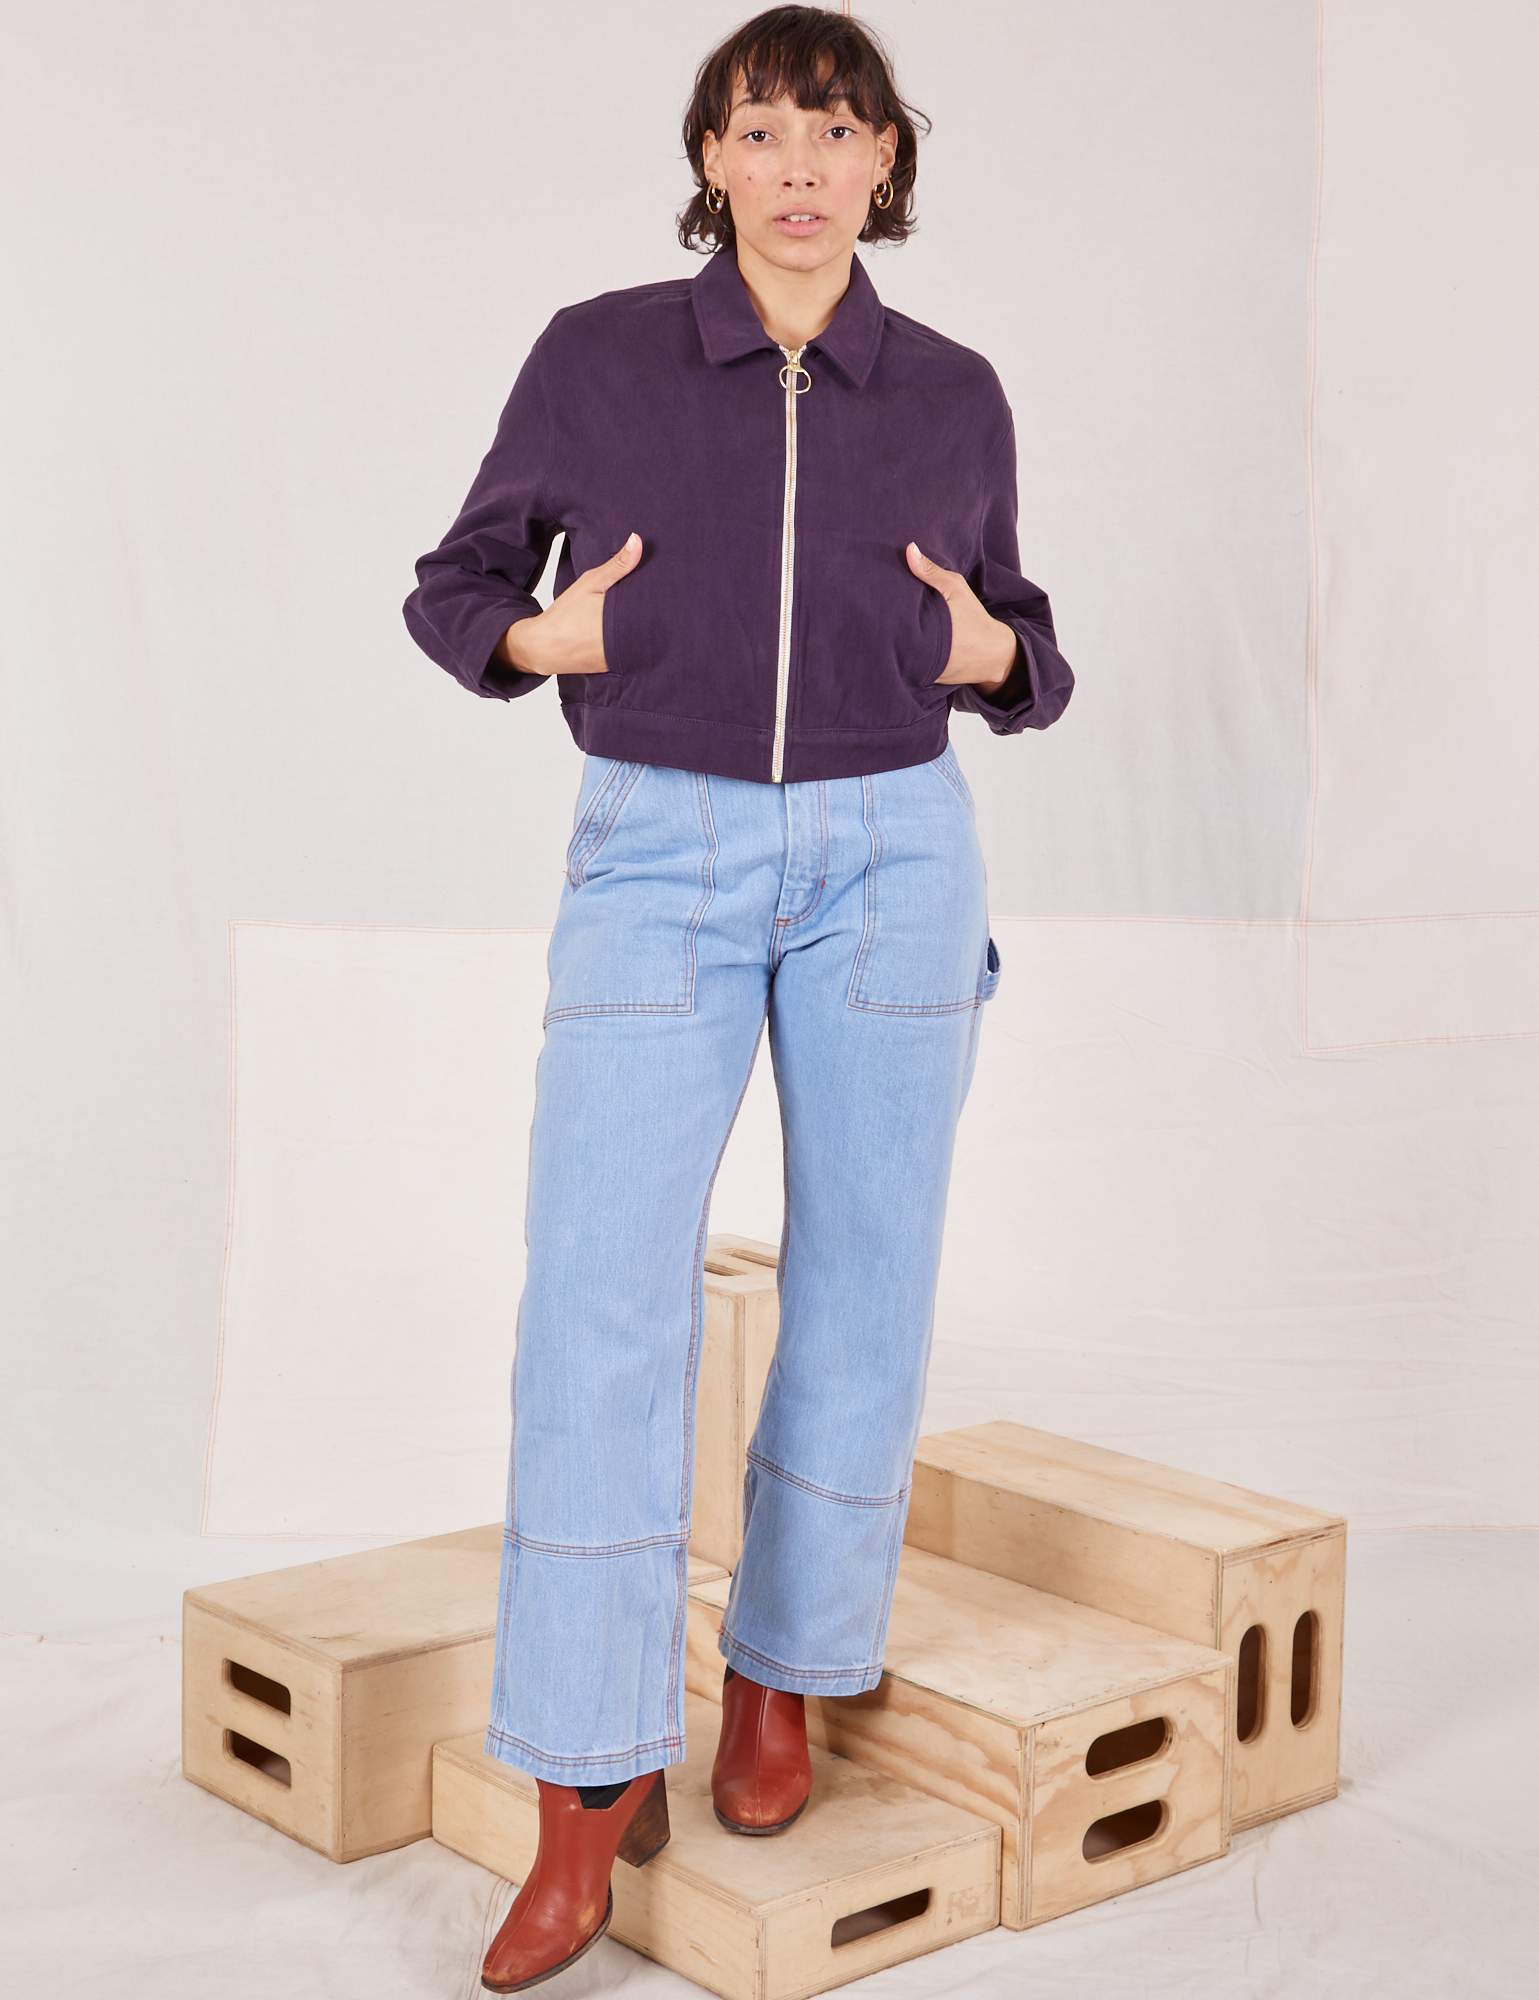 Tiara is wearing Ricky Jacket in Nebula Purple and light wash Carpenter Jeans